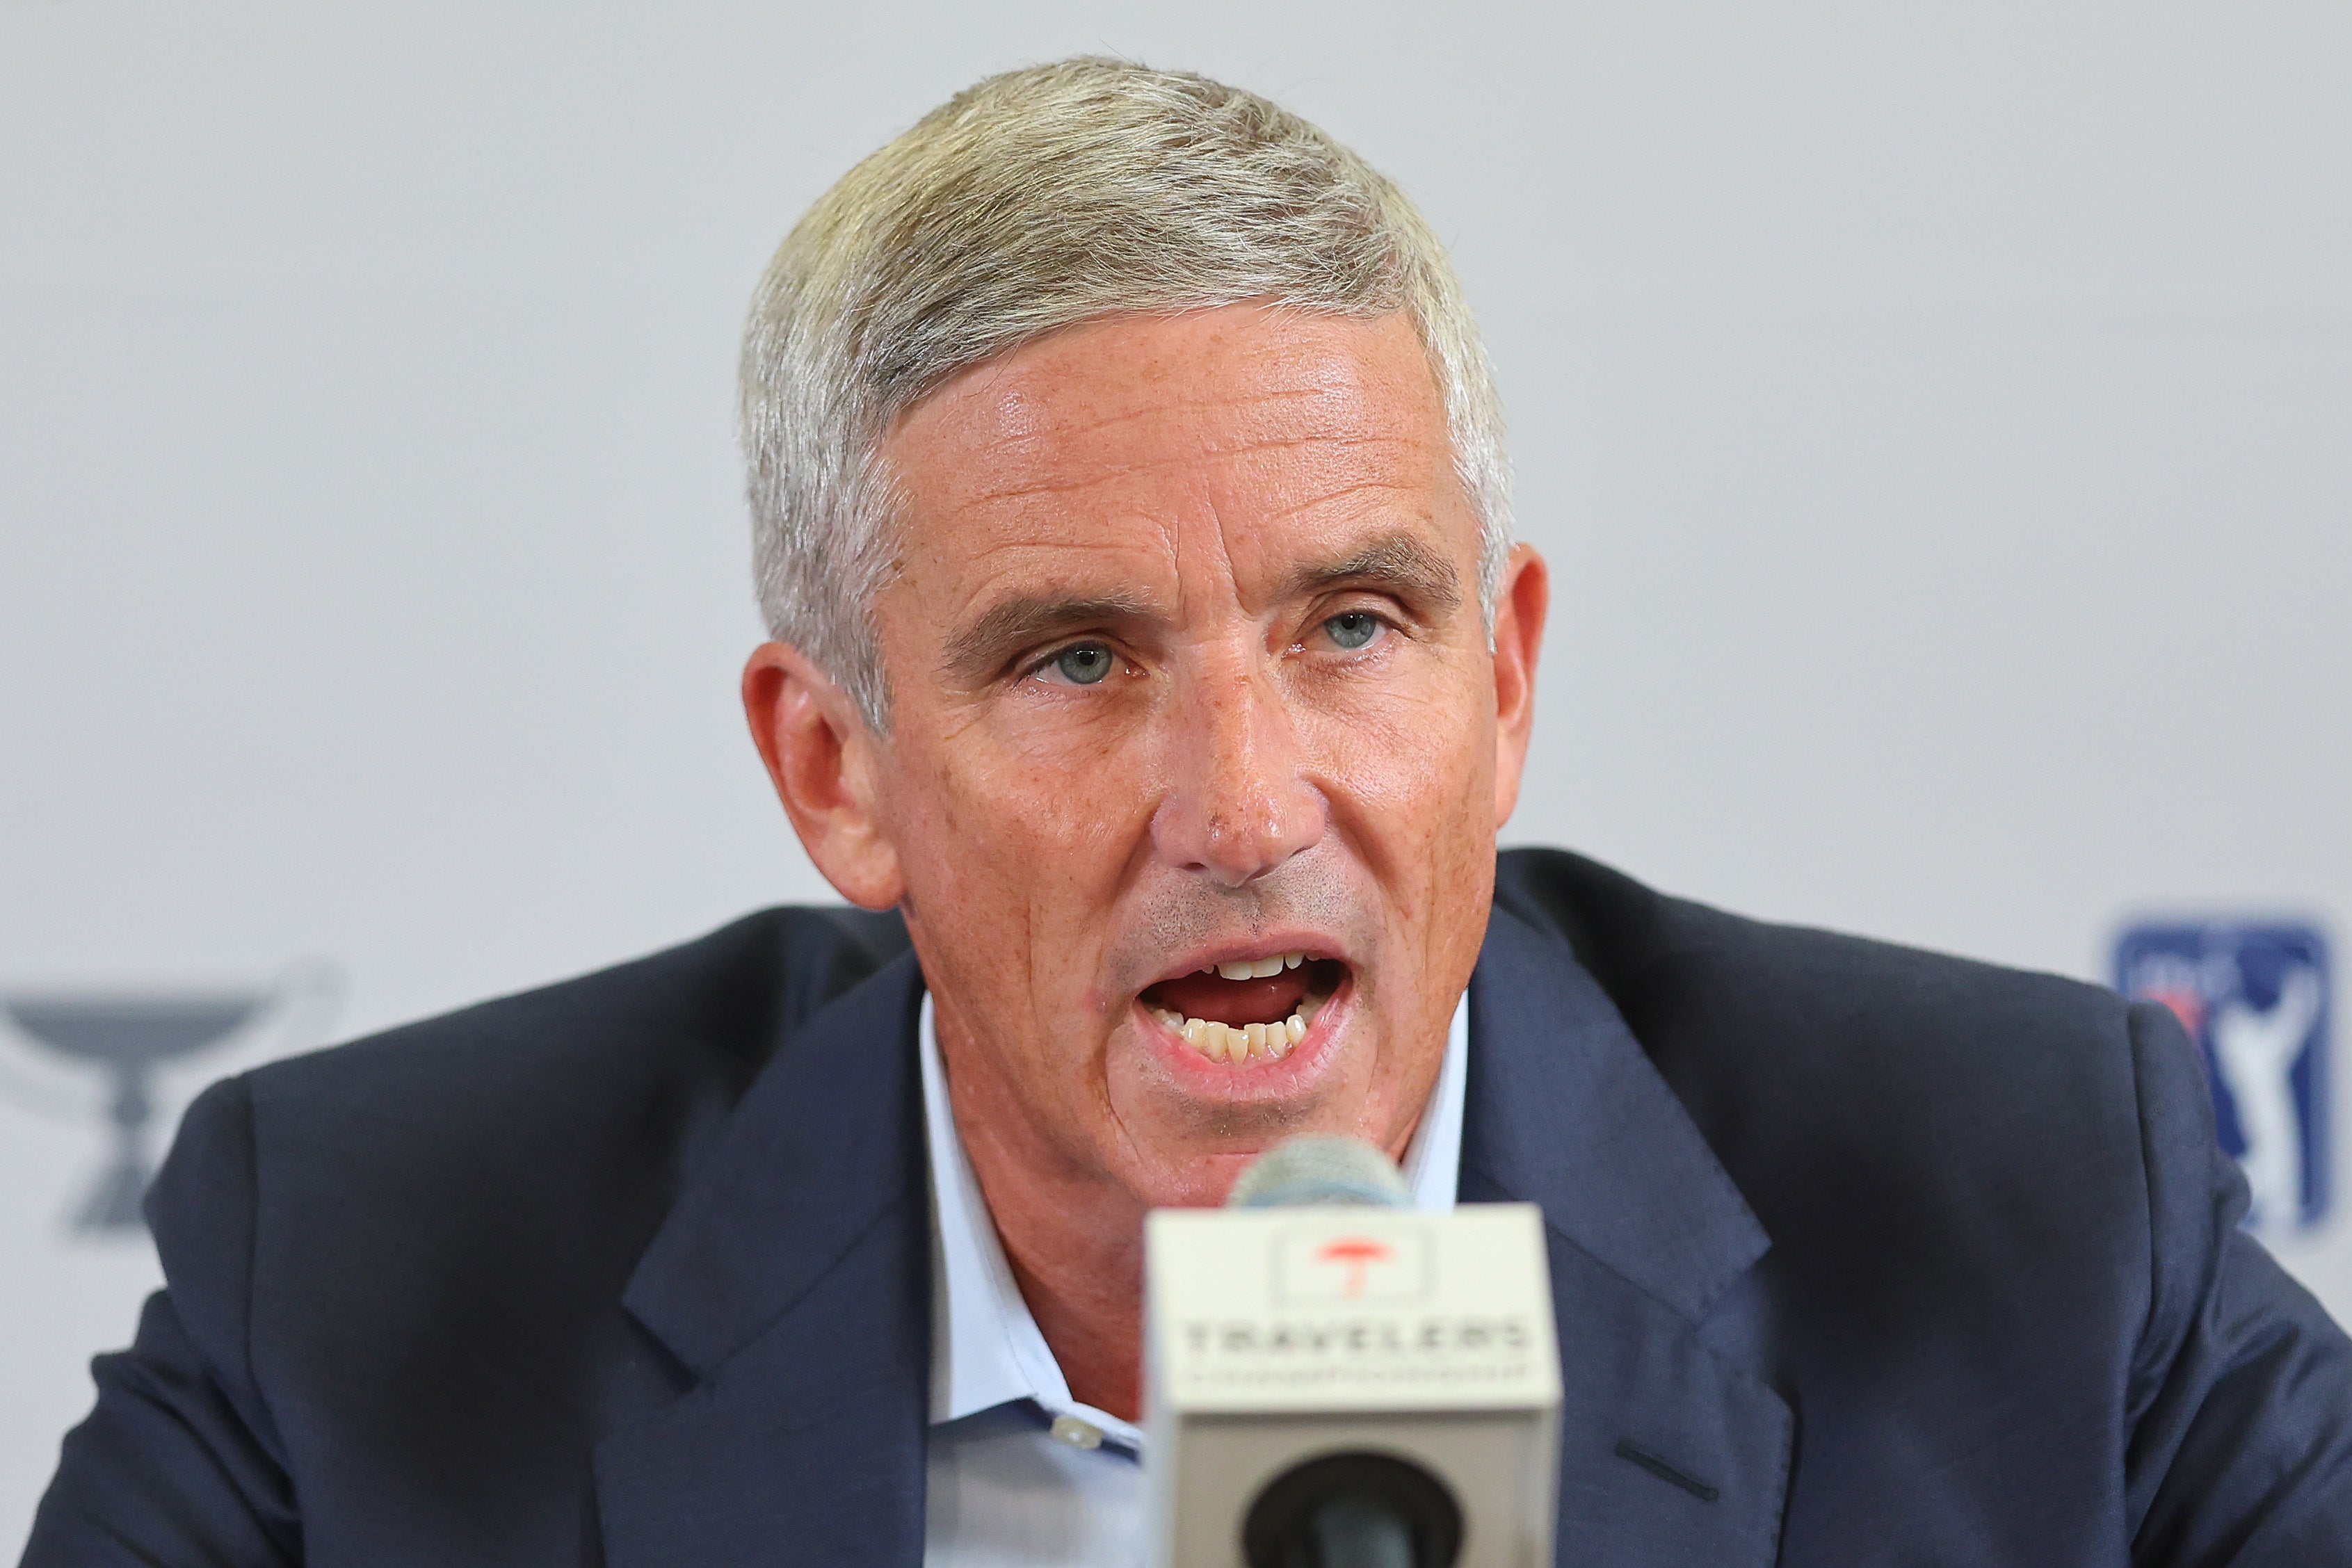 PGA Tour commissioner Jay Monahan announced the plans on Tuesday